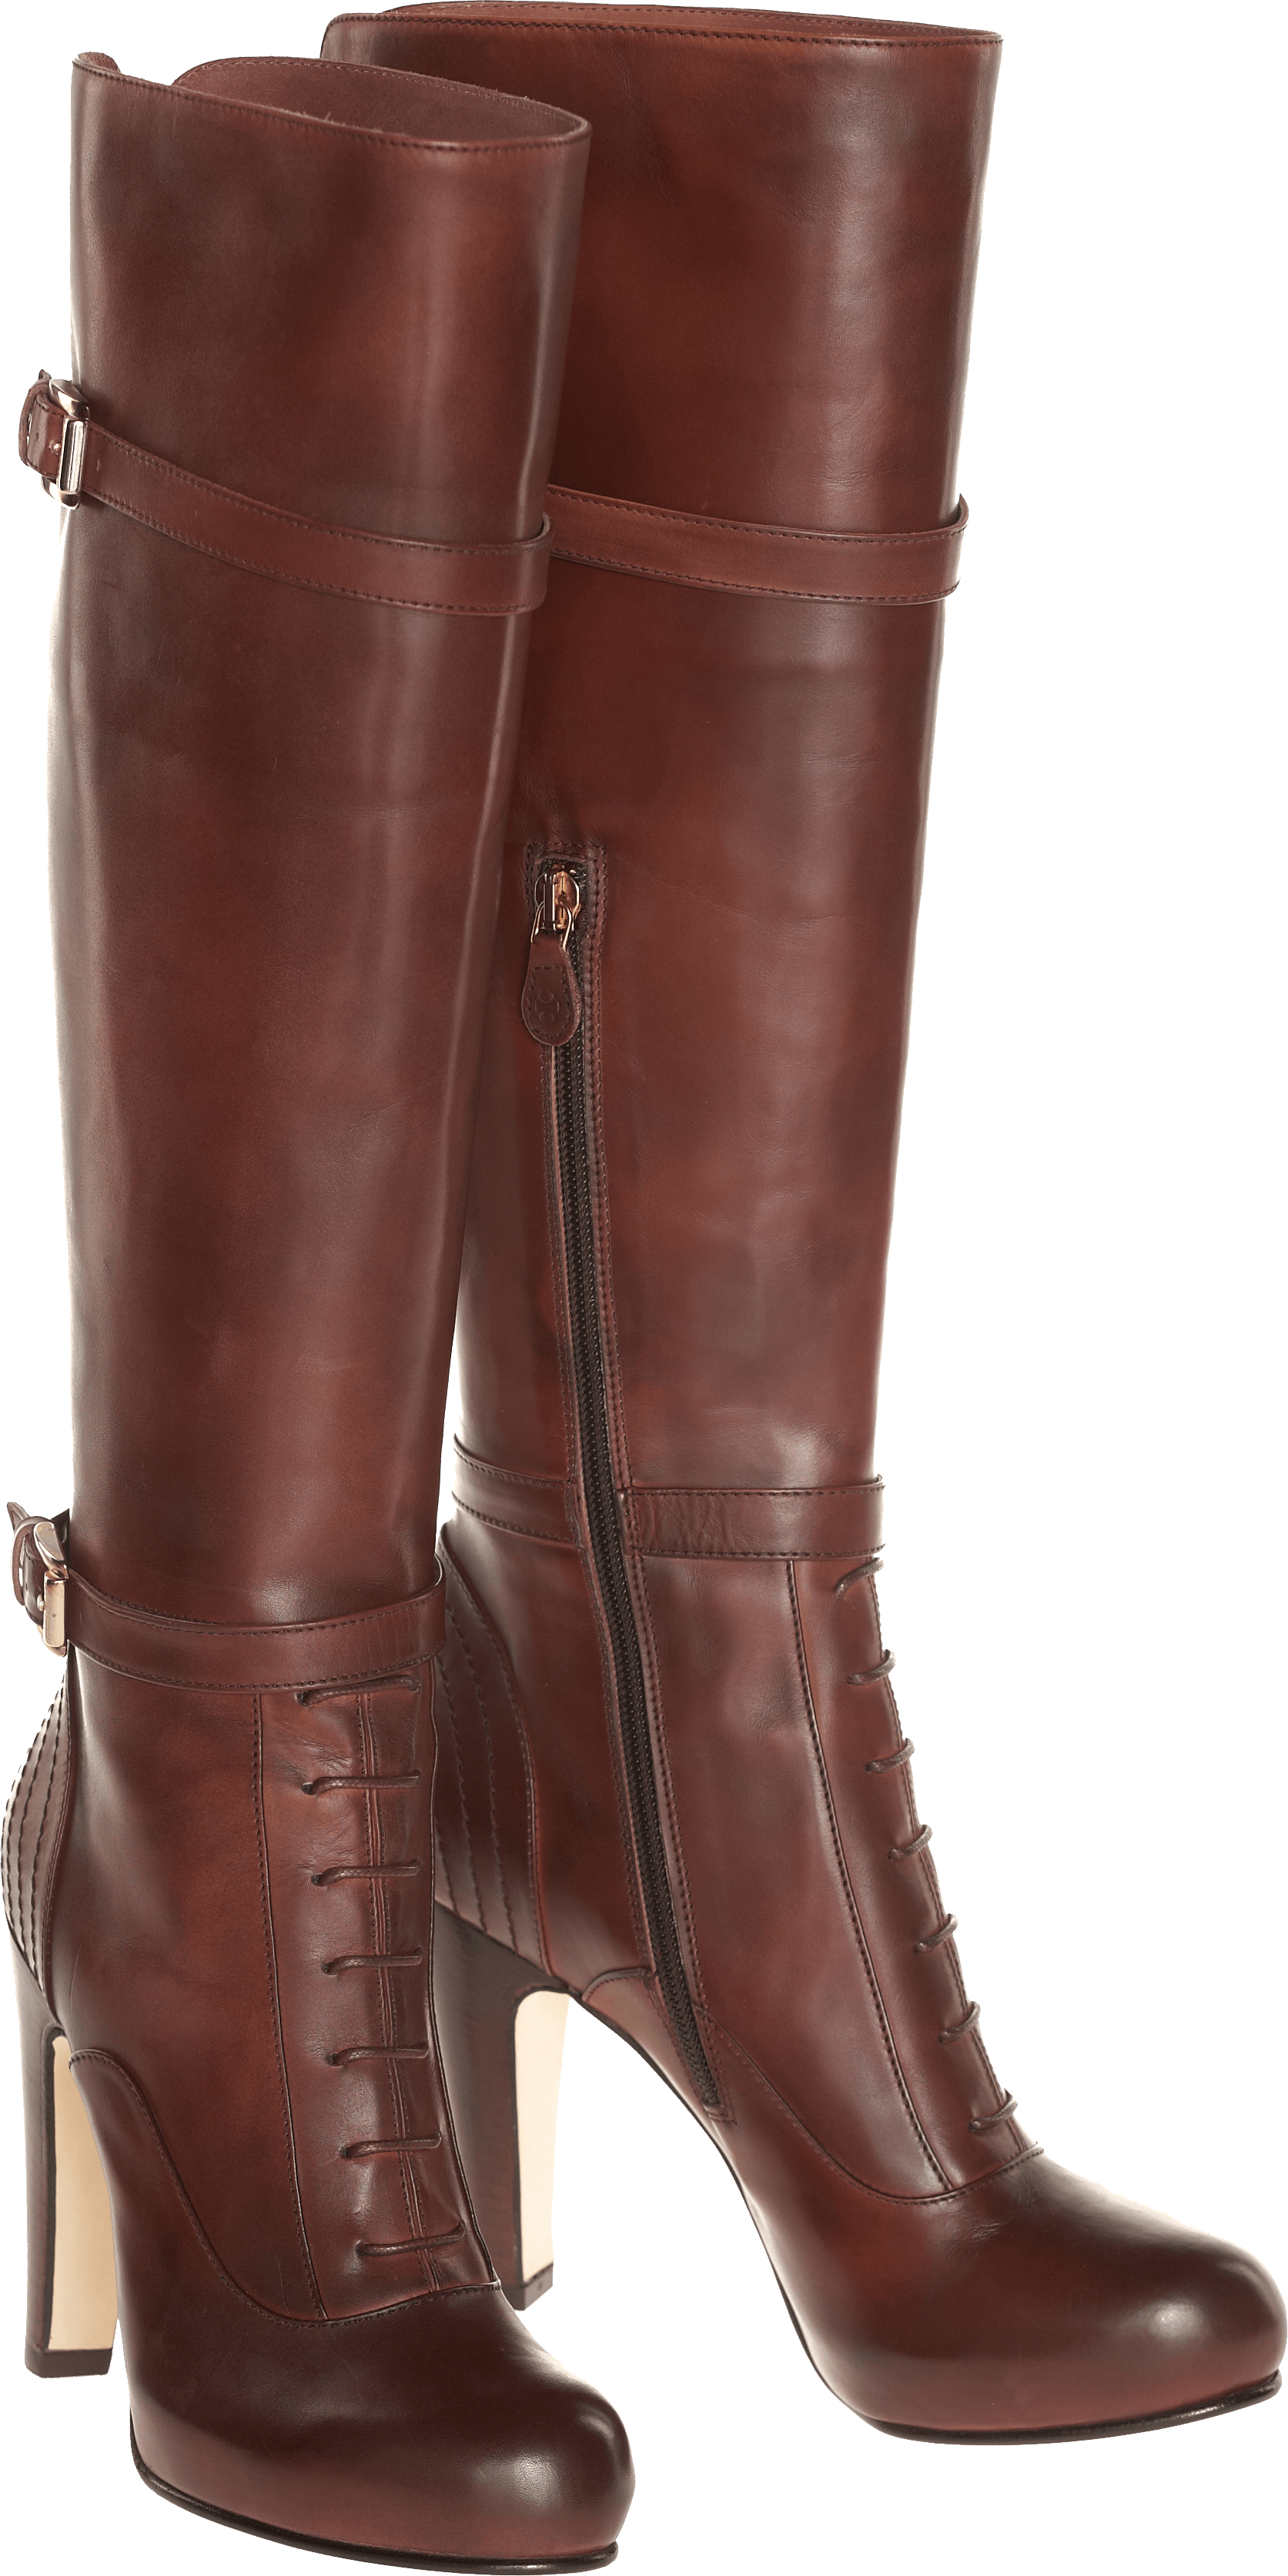 Women Boots Png Image PNG Image